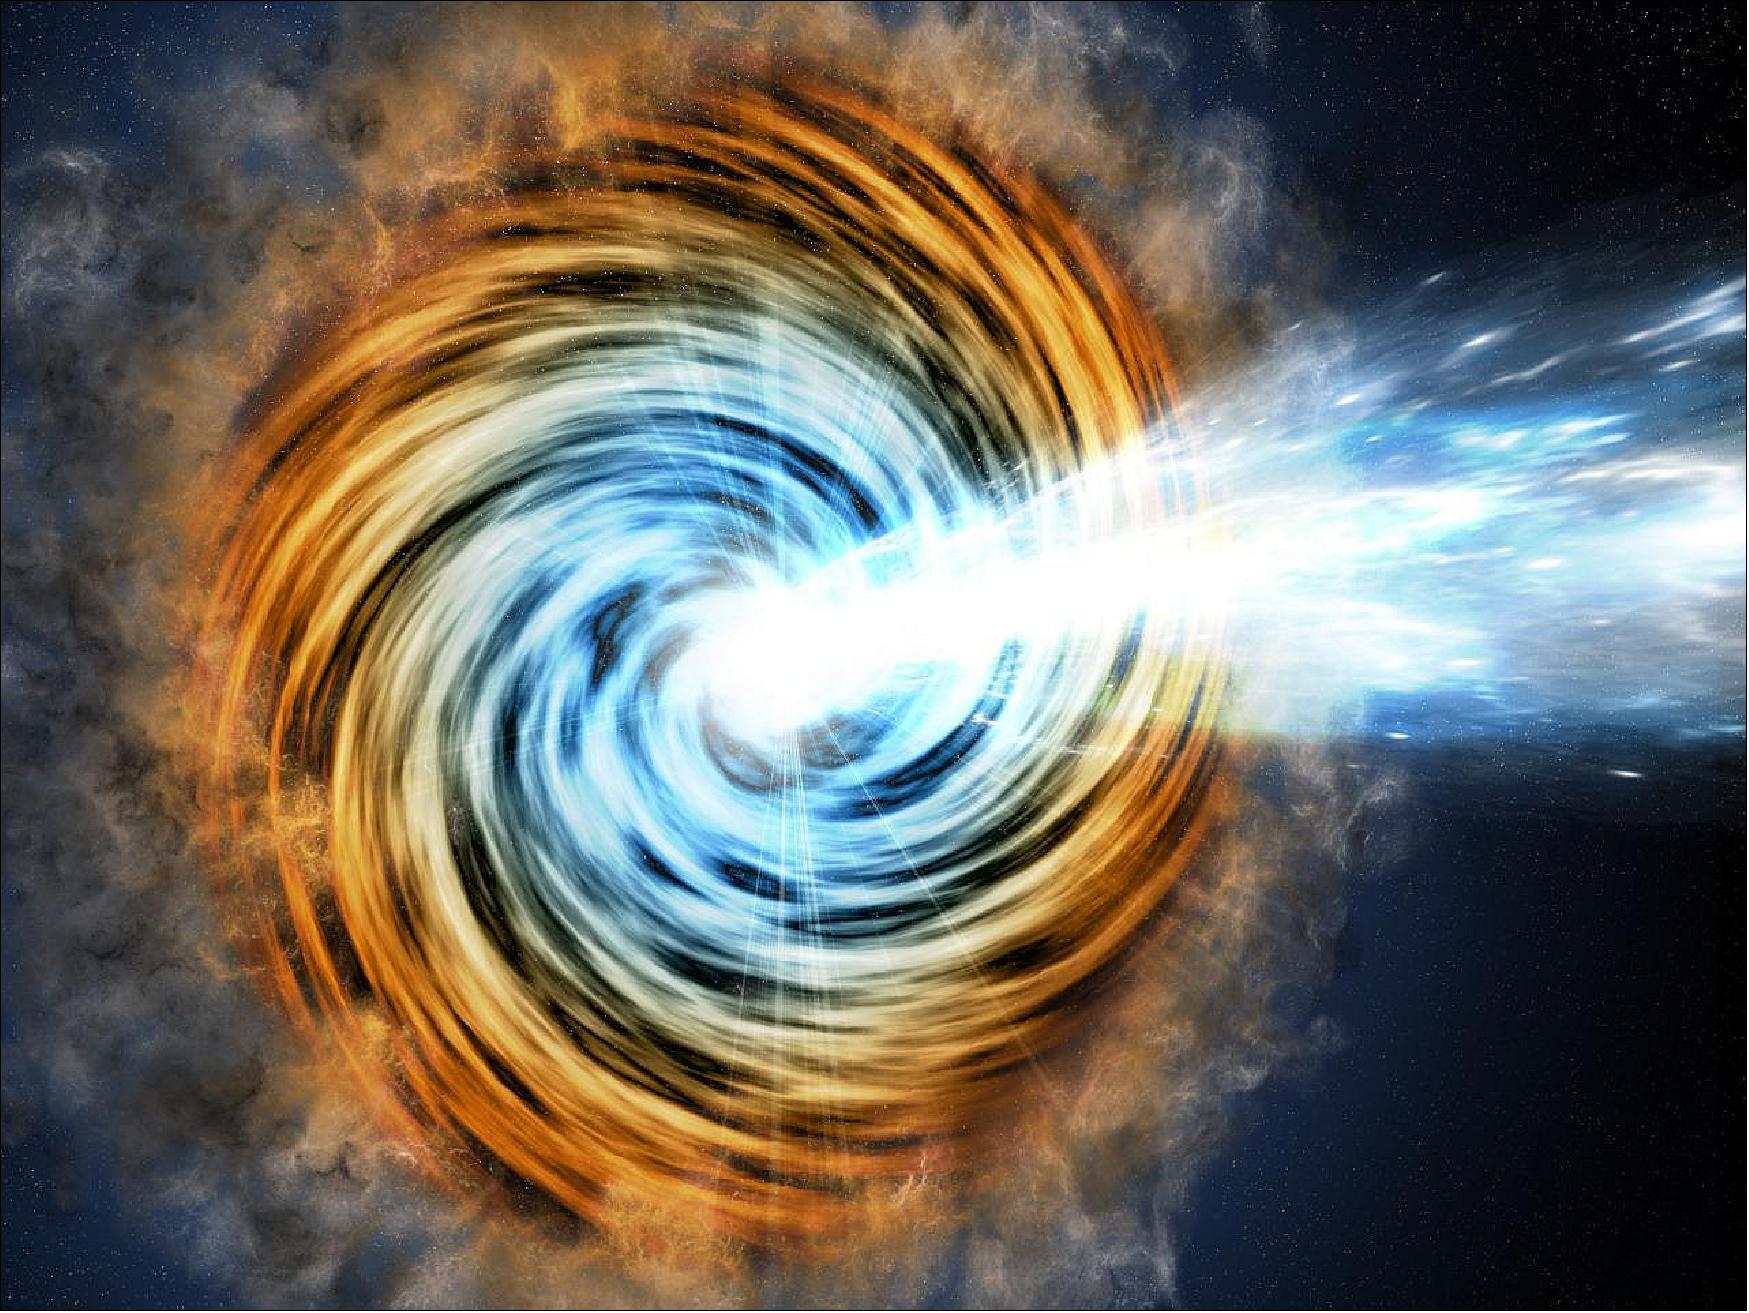 Figure 24: Artist's impression of a blazar, a rare class of active galaxy characterized by a relativistic jet that is pointing in the general direction of the Earth (image credit: M. Weiss/CfA)